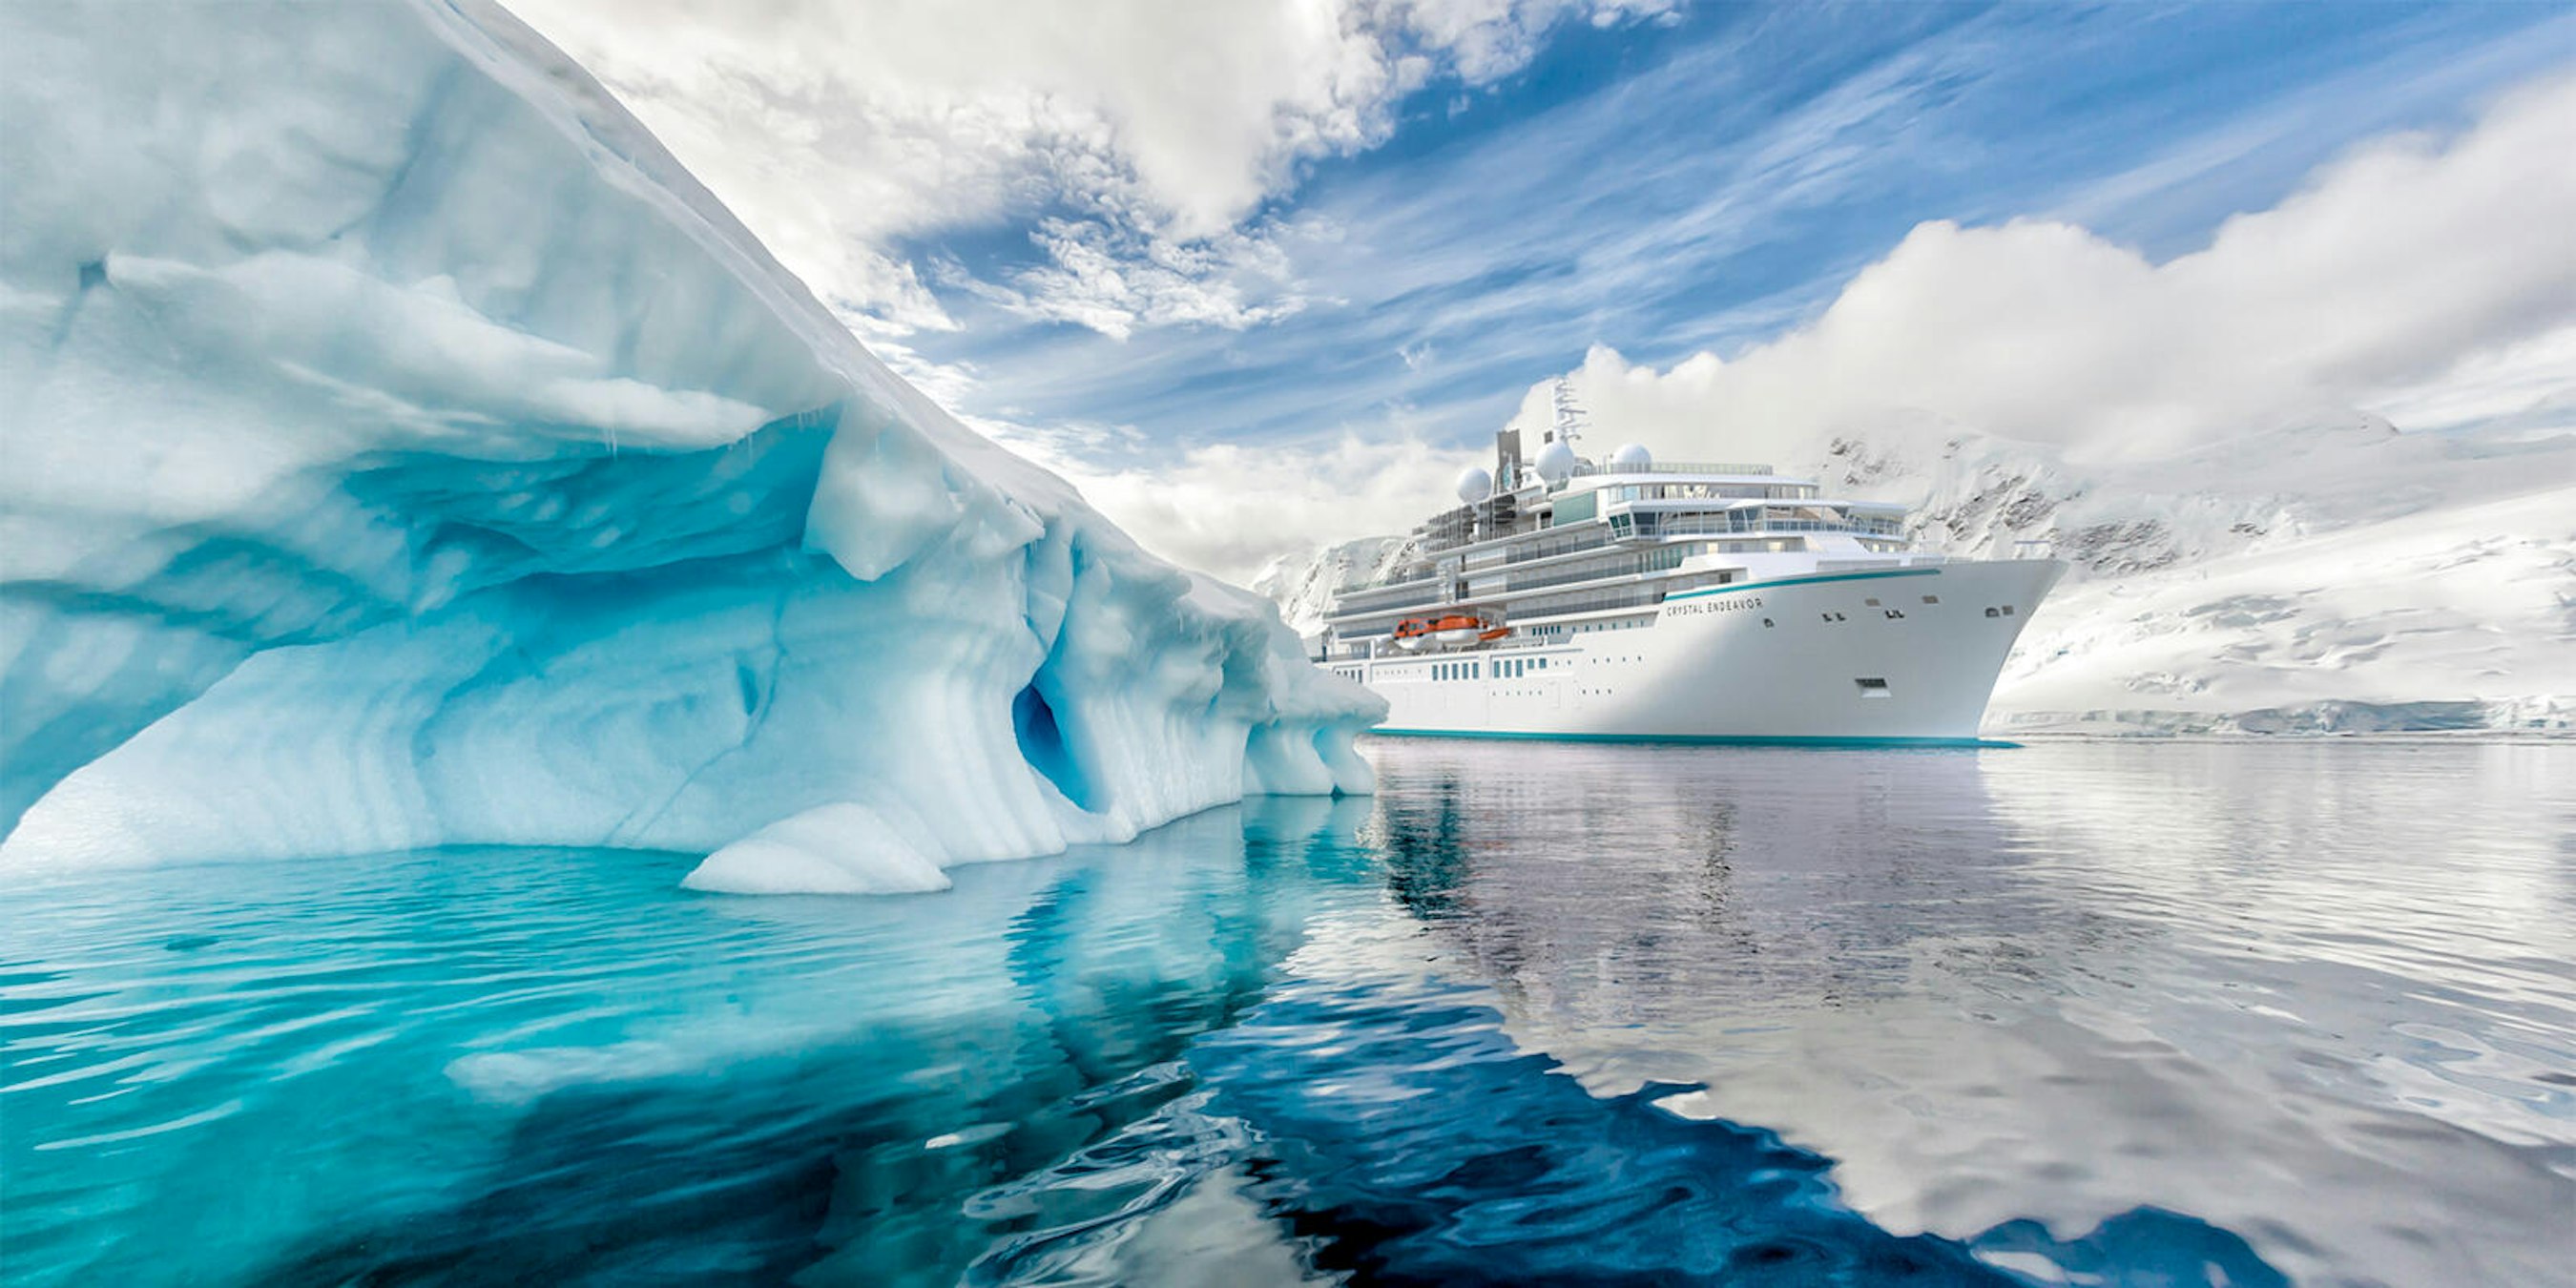 cruise to antarctica from nz